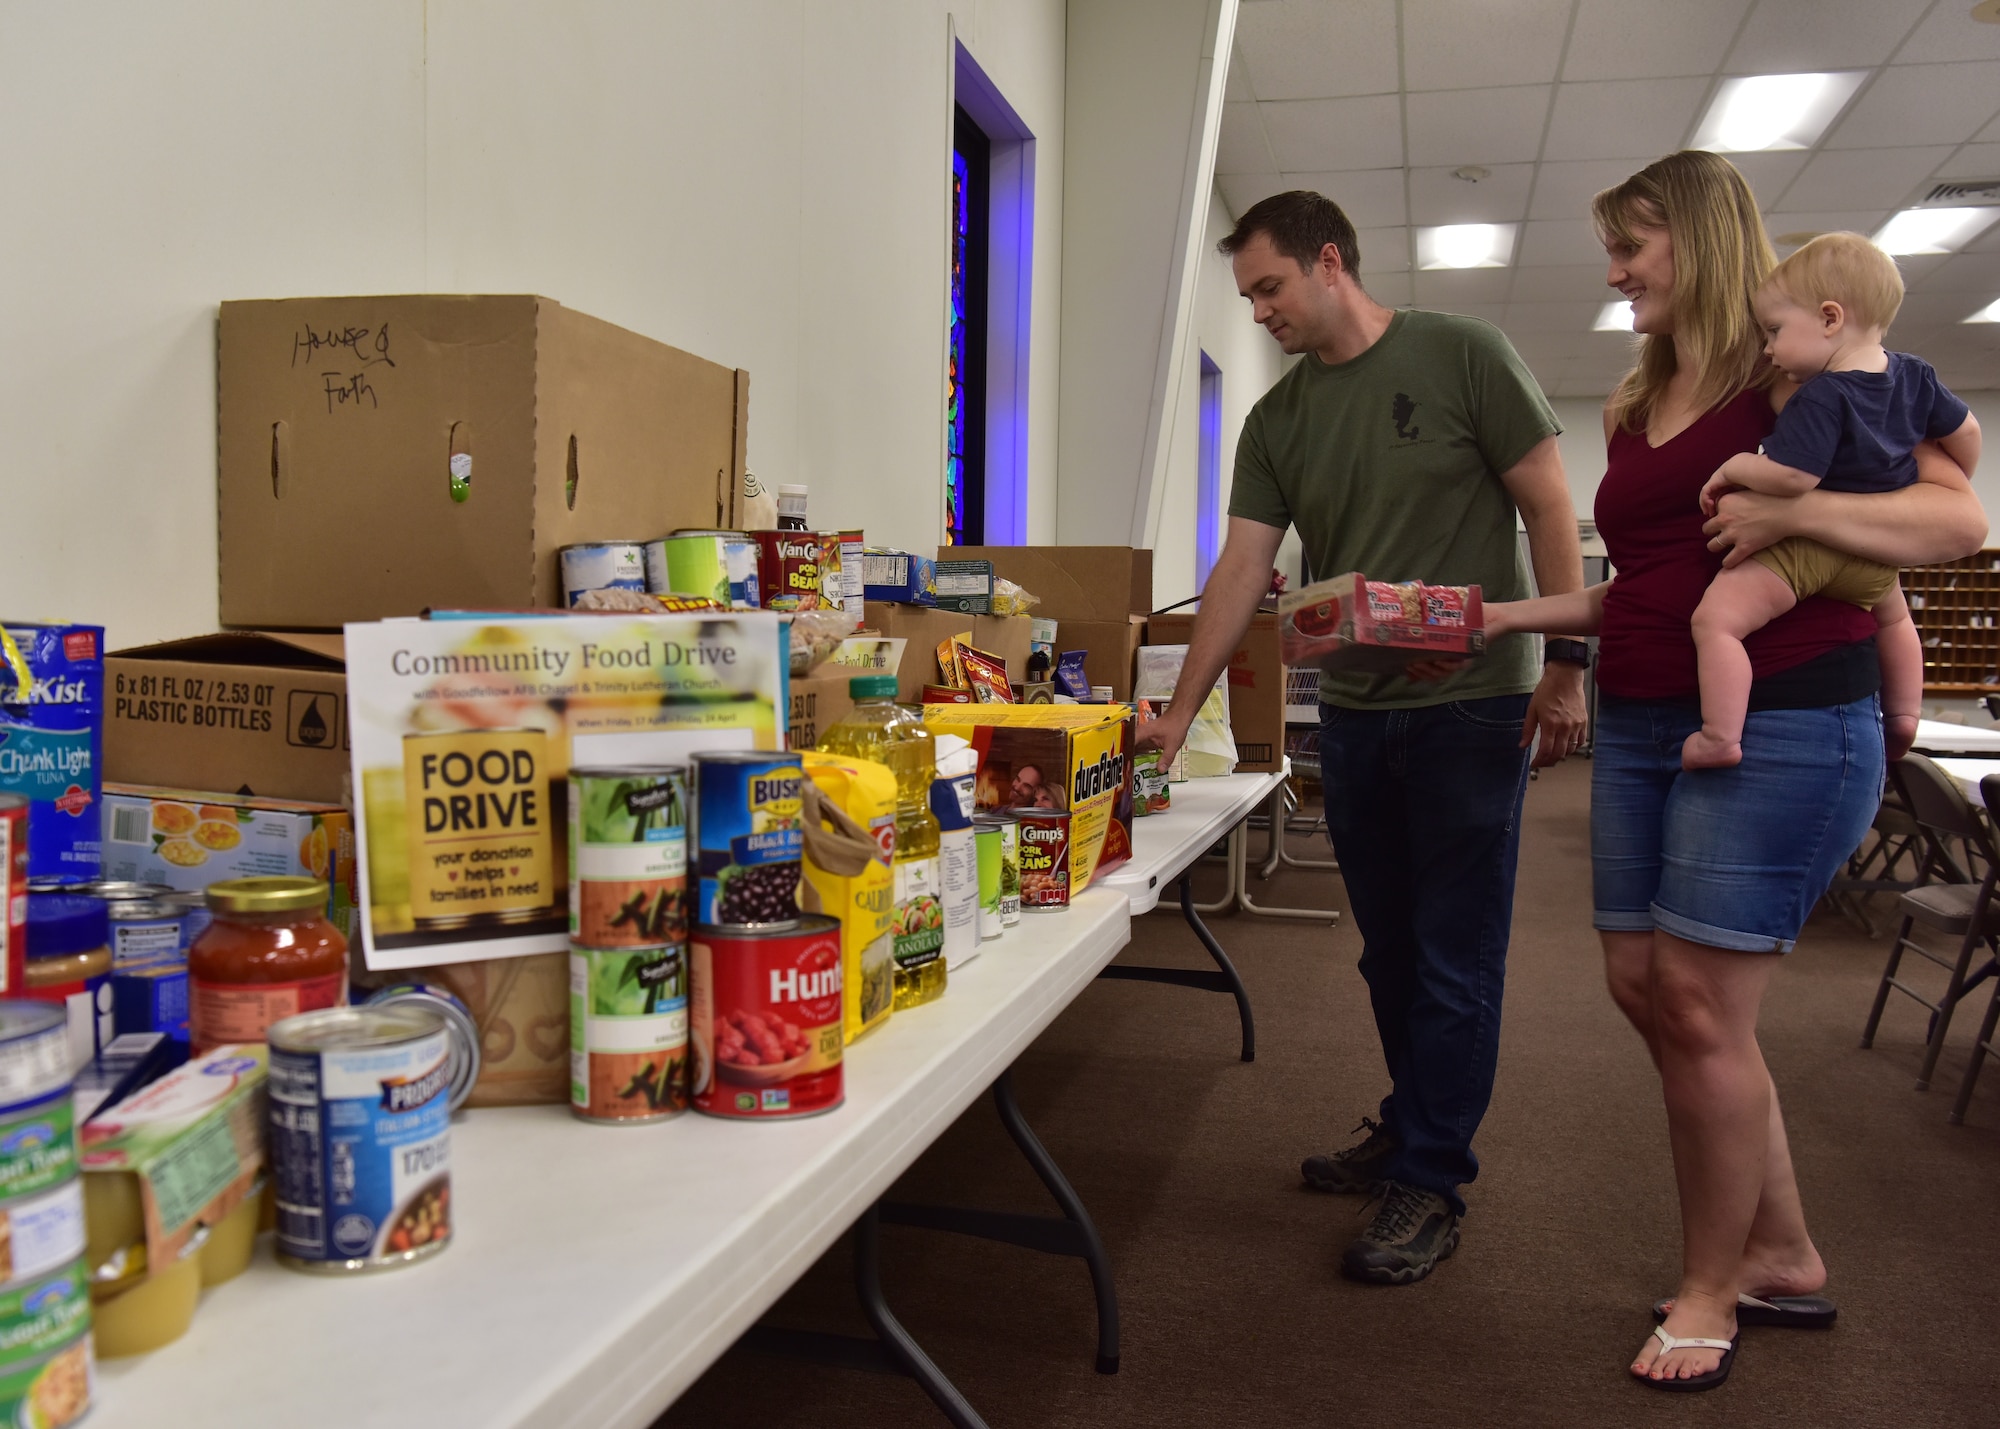 U.S. Air Force Capt. Jonathan Shour, 17th Training Wing chaplain, along with his wife Rebecca and son Ezekiel, organize donations during a food drive at Trinity Lutheran Church in San Angelo, Texas, April 22, 2020. The church is one of the locations collecting donations from Goodfellow Air Force Base members and the local community and continues until April 24. (U.S. Air Force photo by Staff Sgt. Chad Warren)